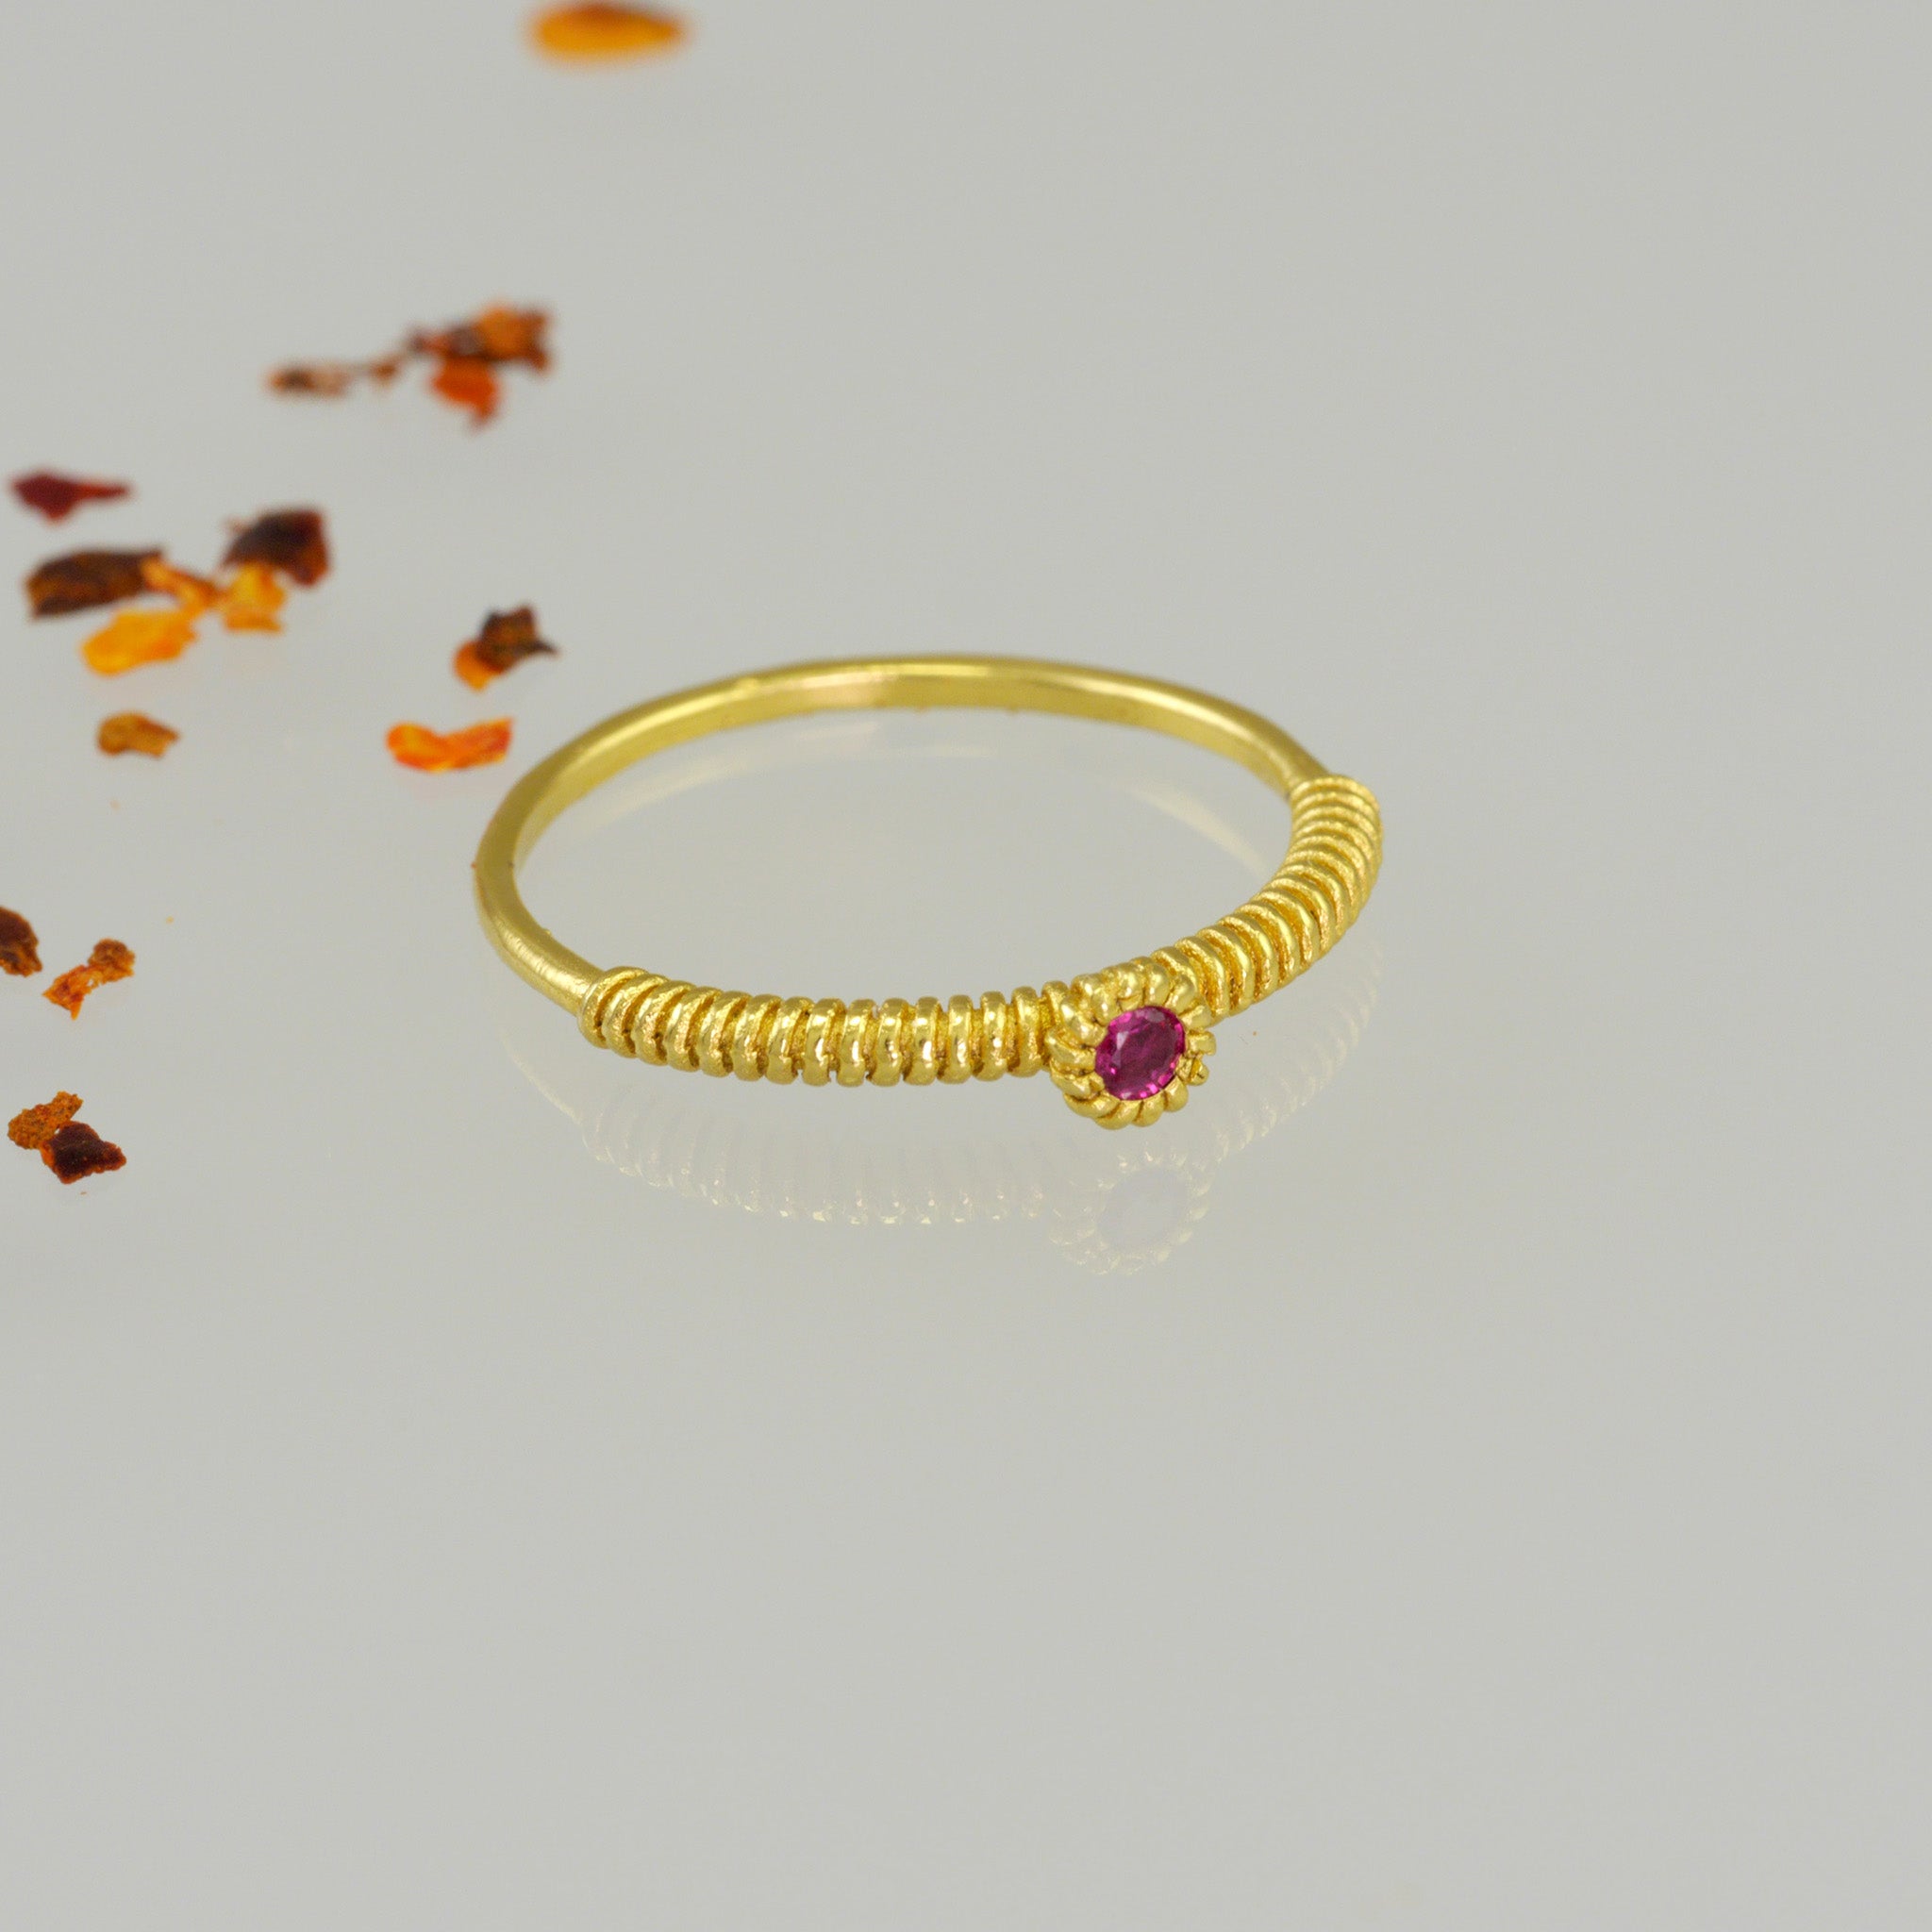 A thin gold ring with a coiled gold string, showcasing a vivid Ruby at its center. Elegant and charming, it radiates subtle allure.